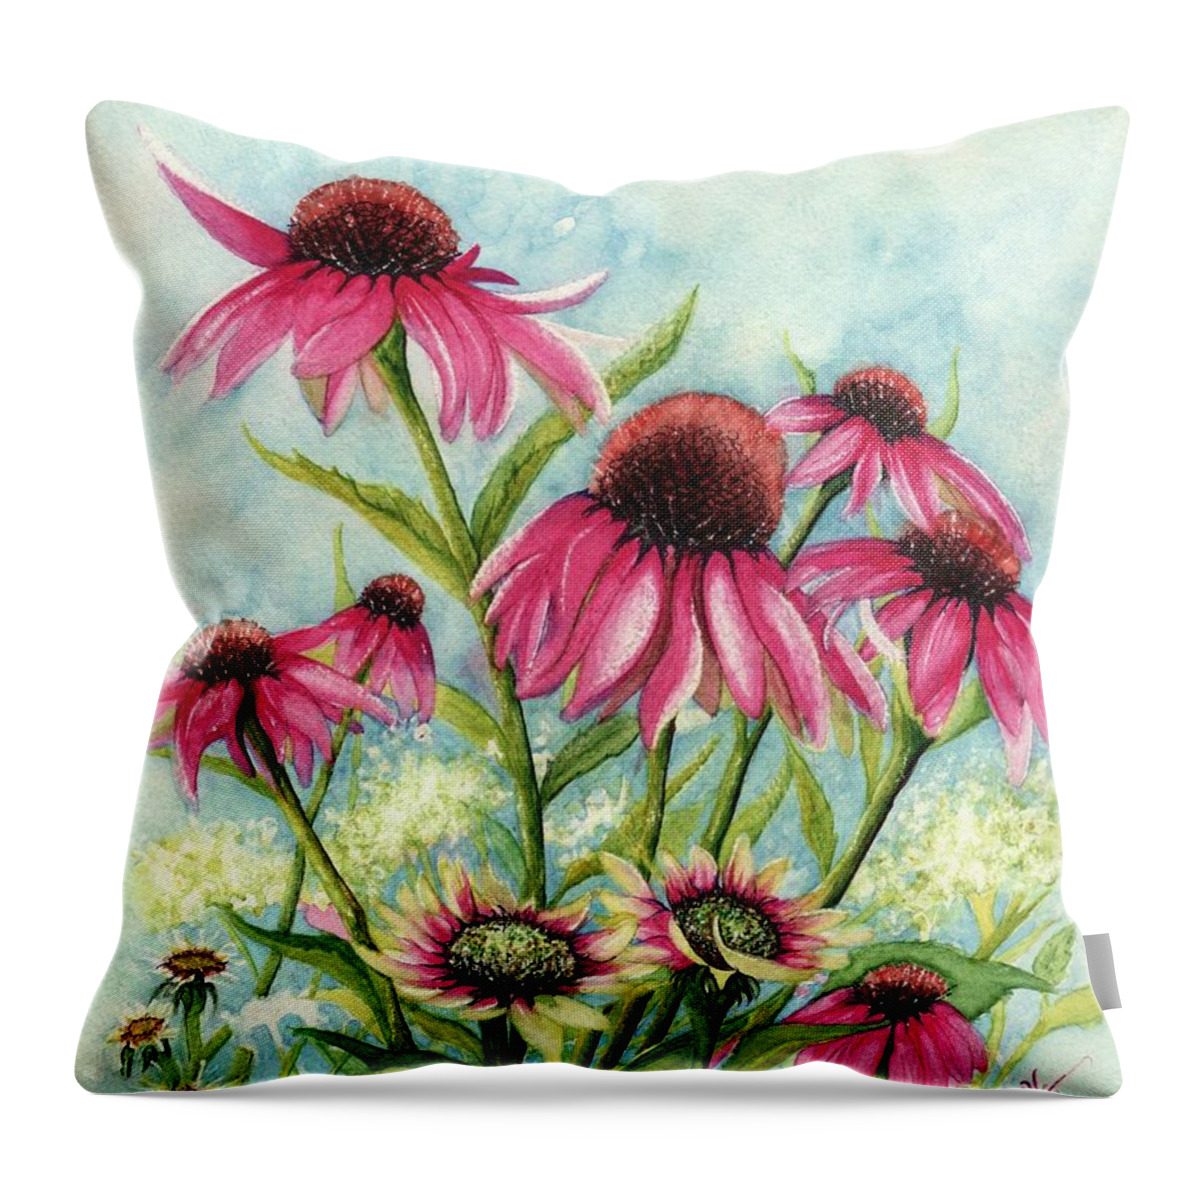 Flower Throw Pillow featuring the painting Pink Coneflowers by Janine Riley